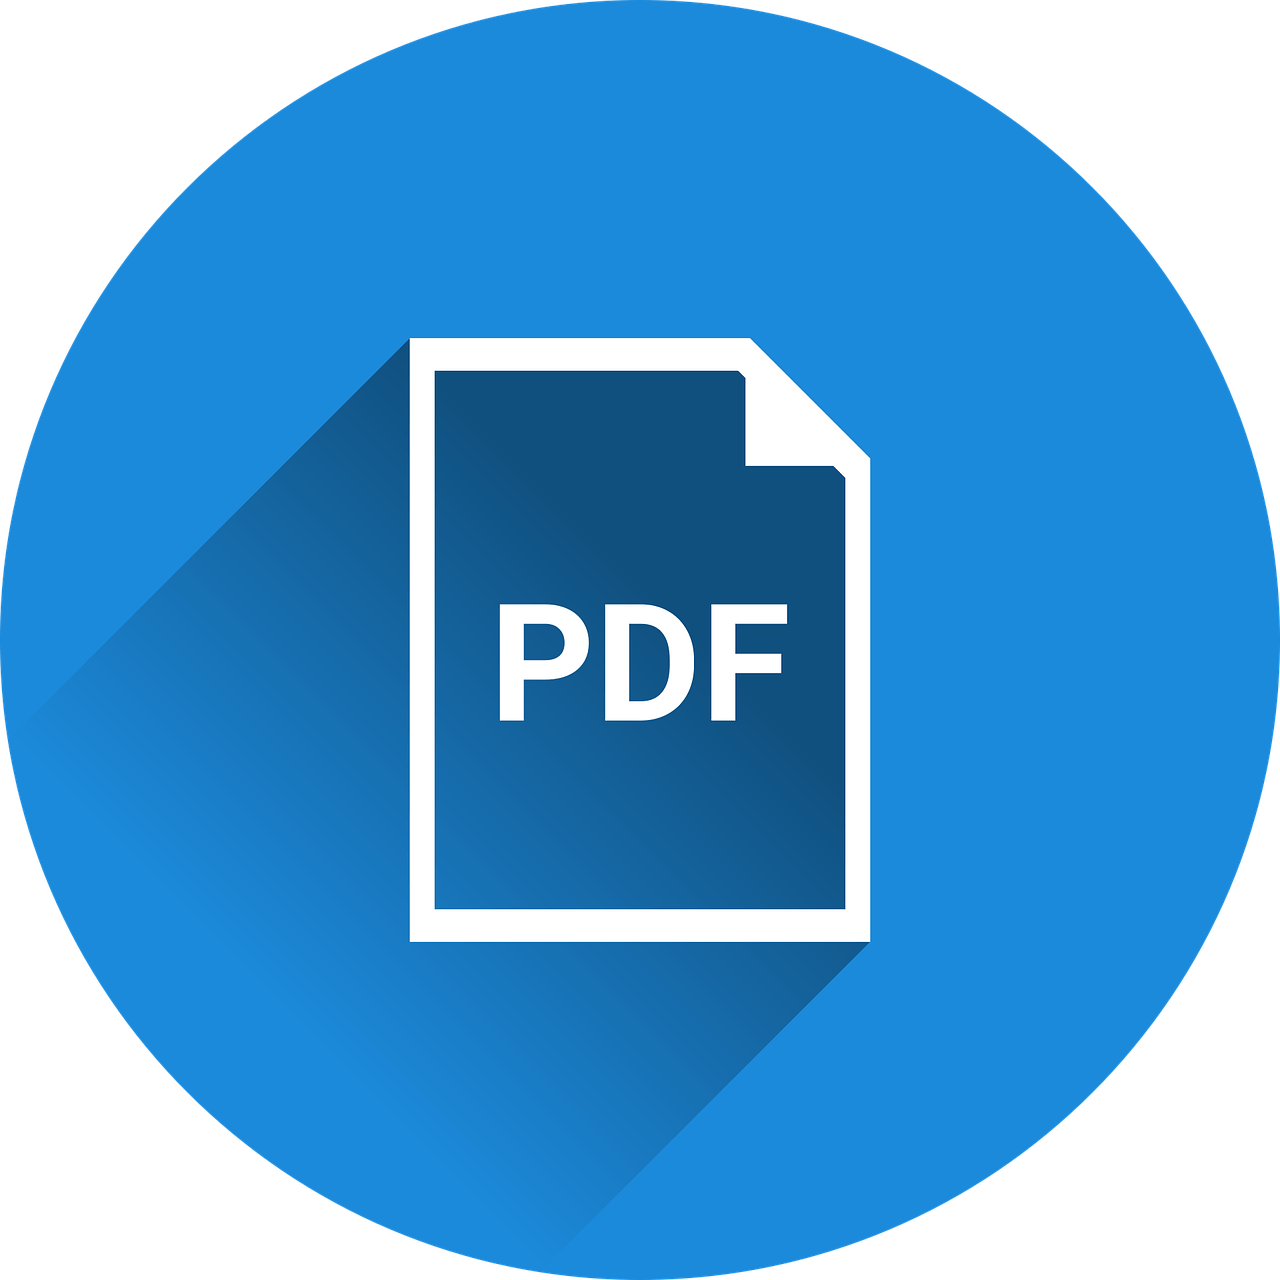 GoGoPDF: Instantly Convert Word To PDF With The Help Of This Online Tool